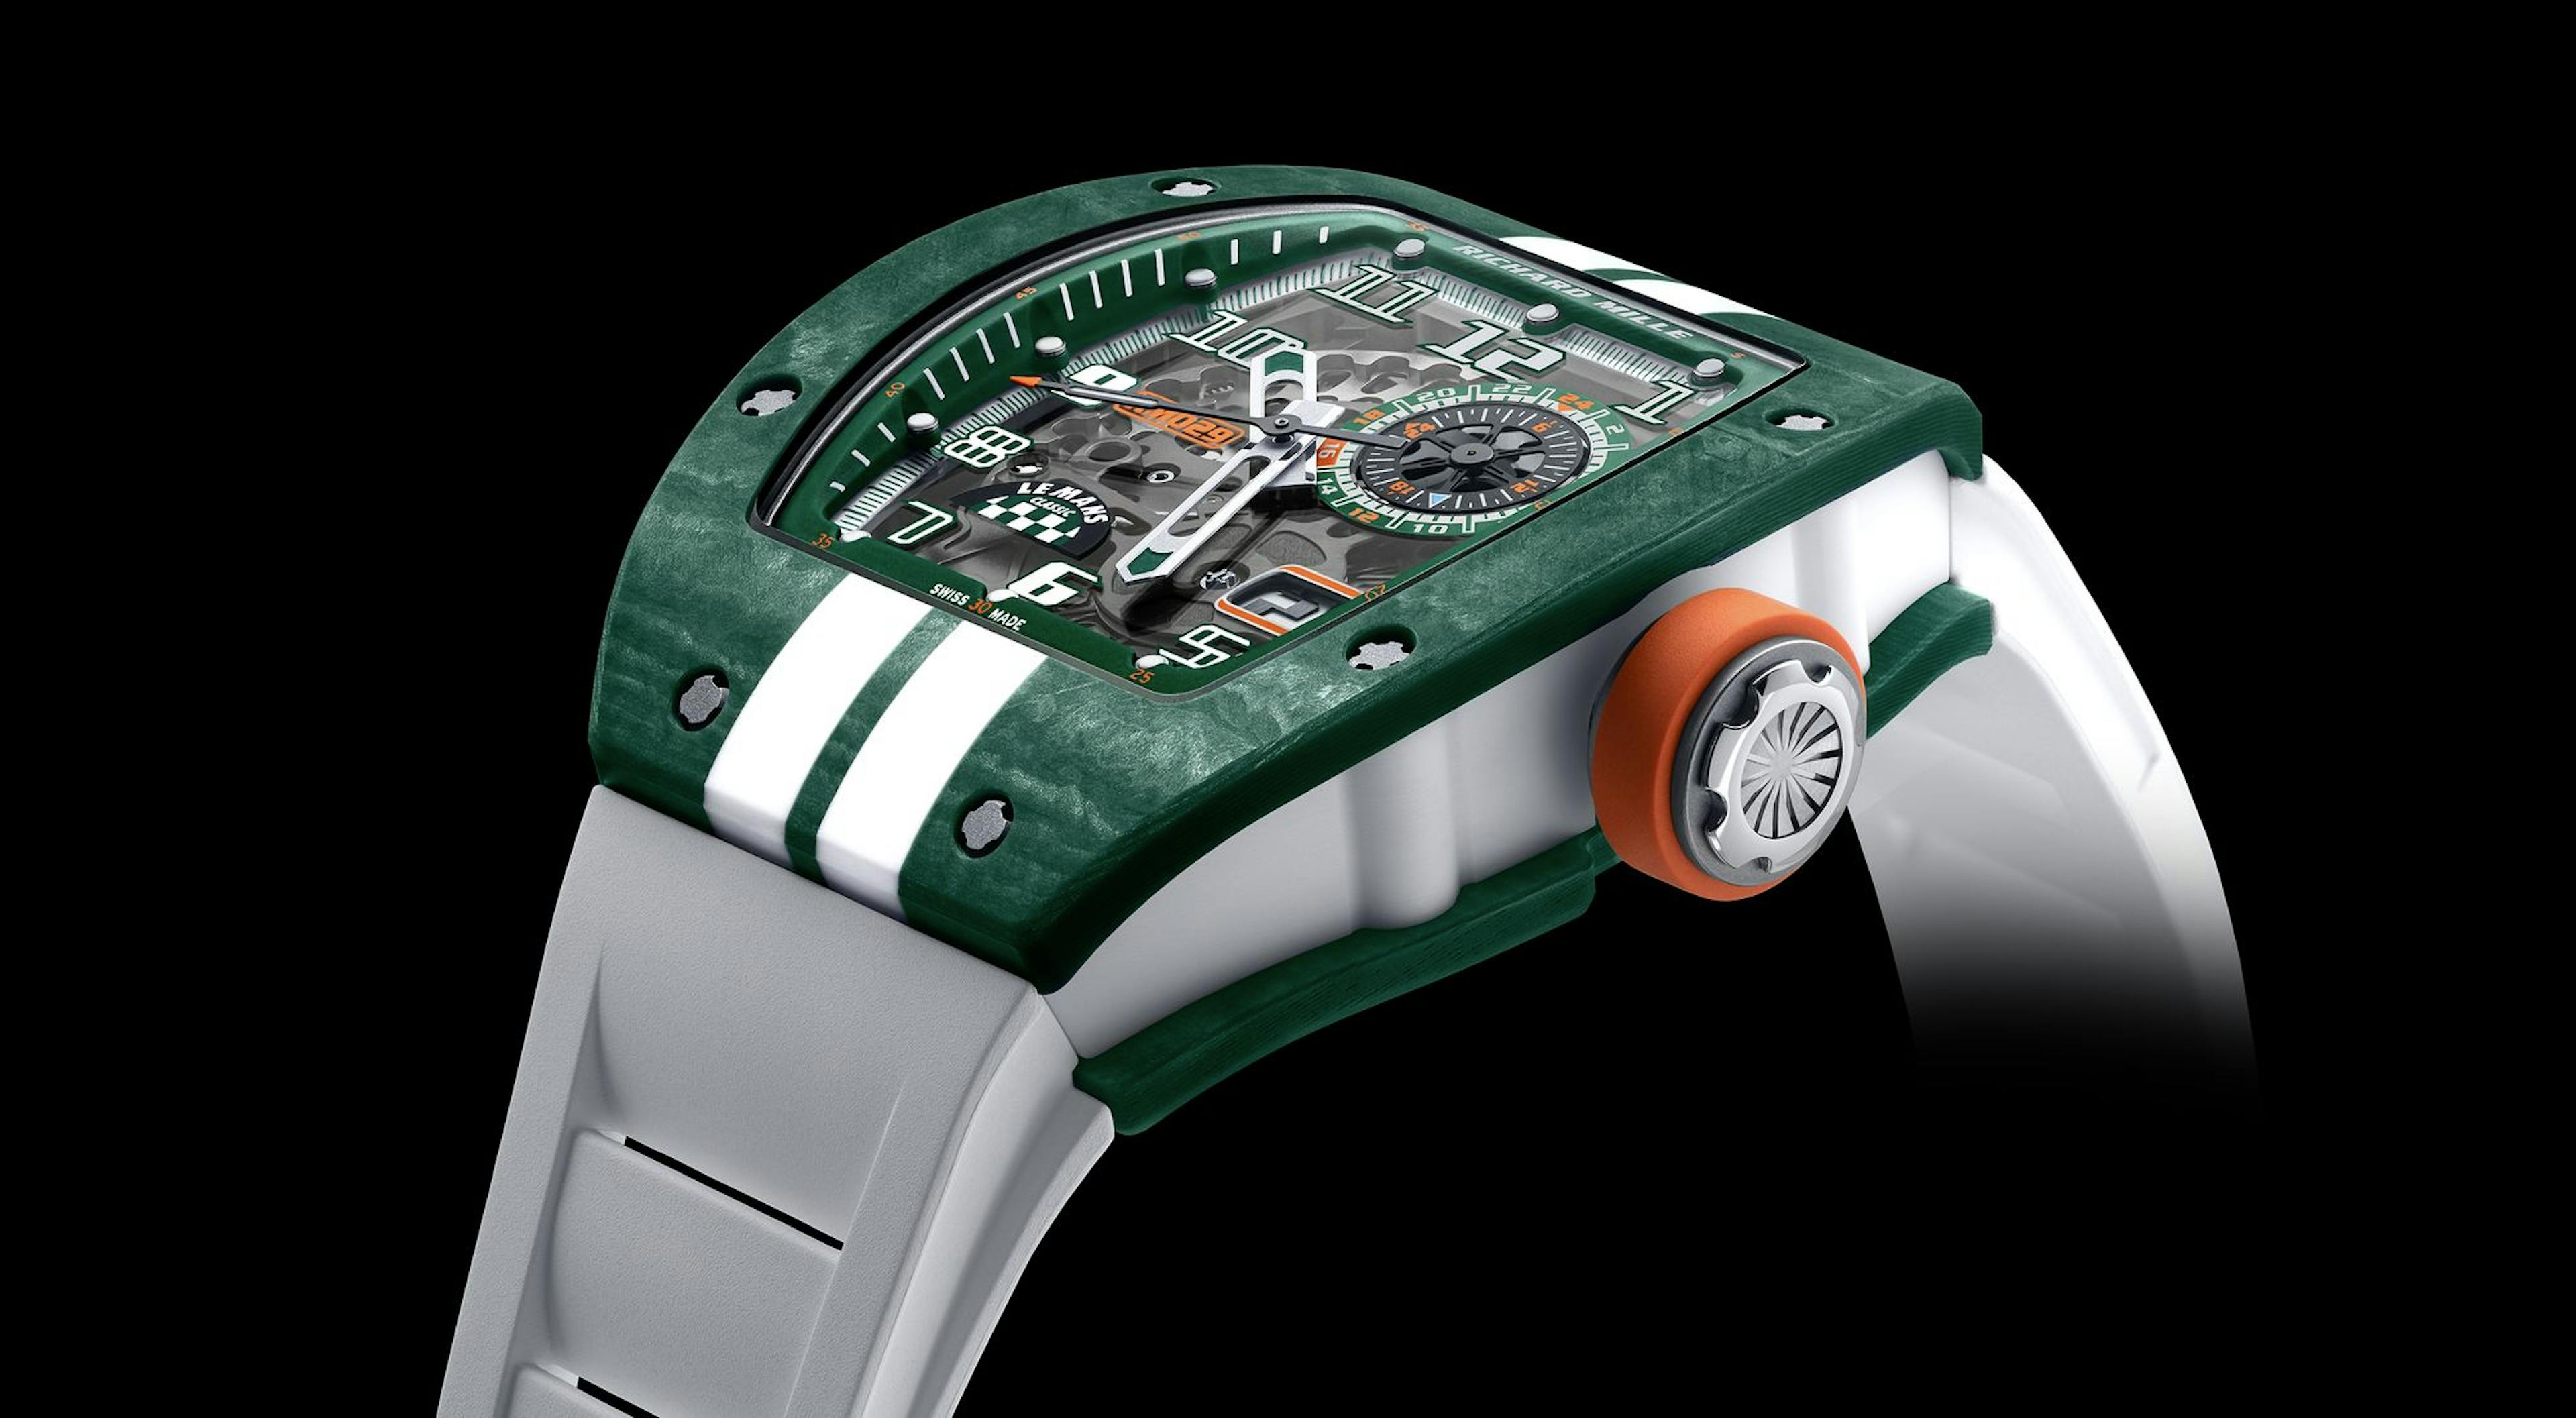 The Richard Mille Le Mans Special Edition. The case is made of special composite materials inspired by those used in racing cars.